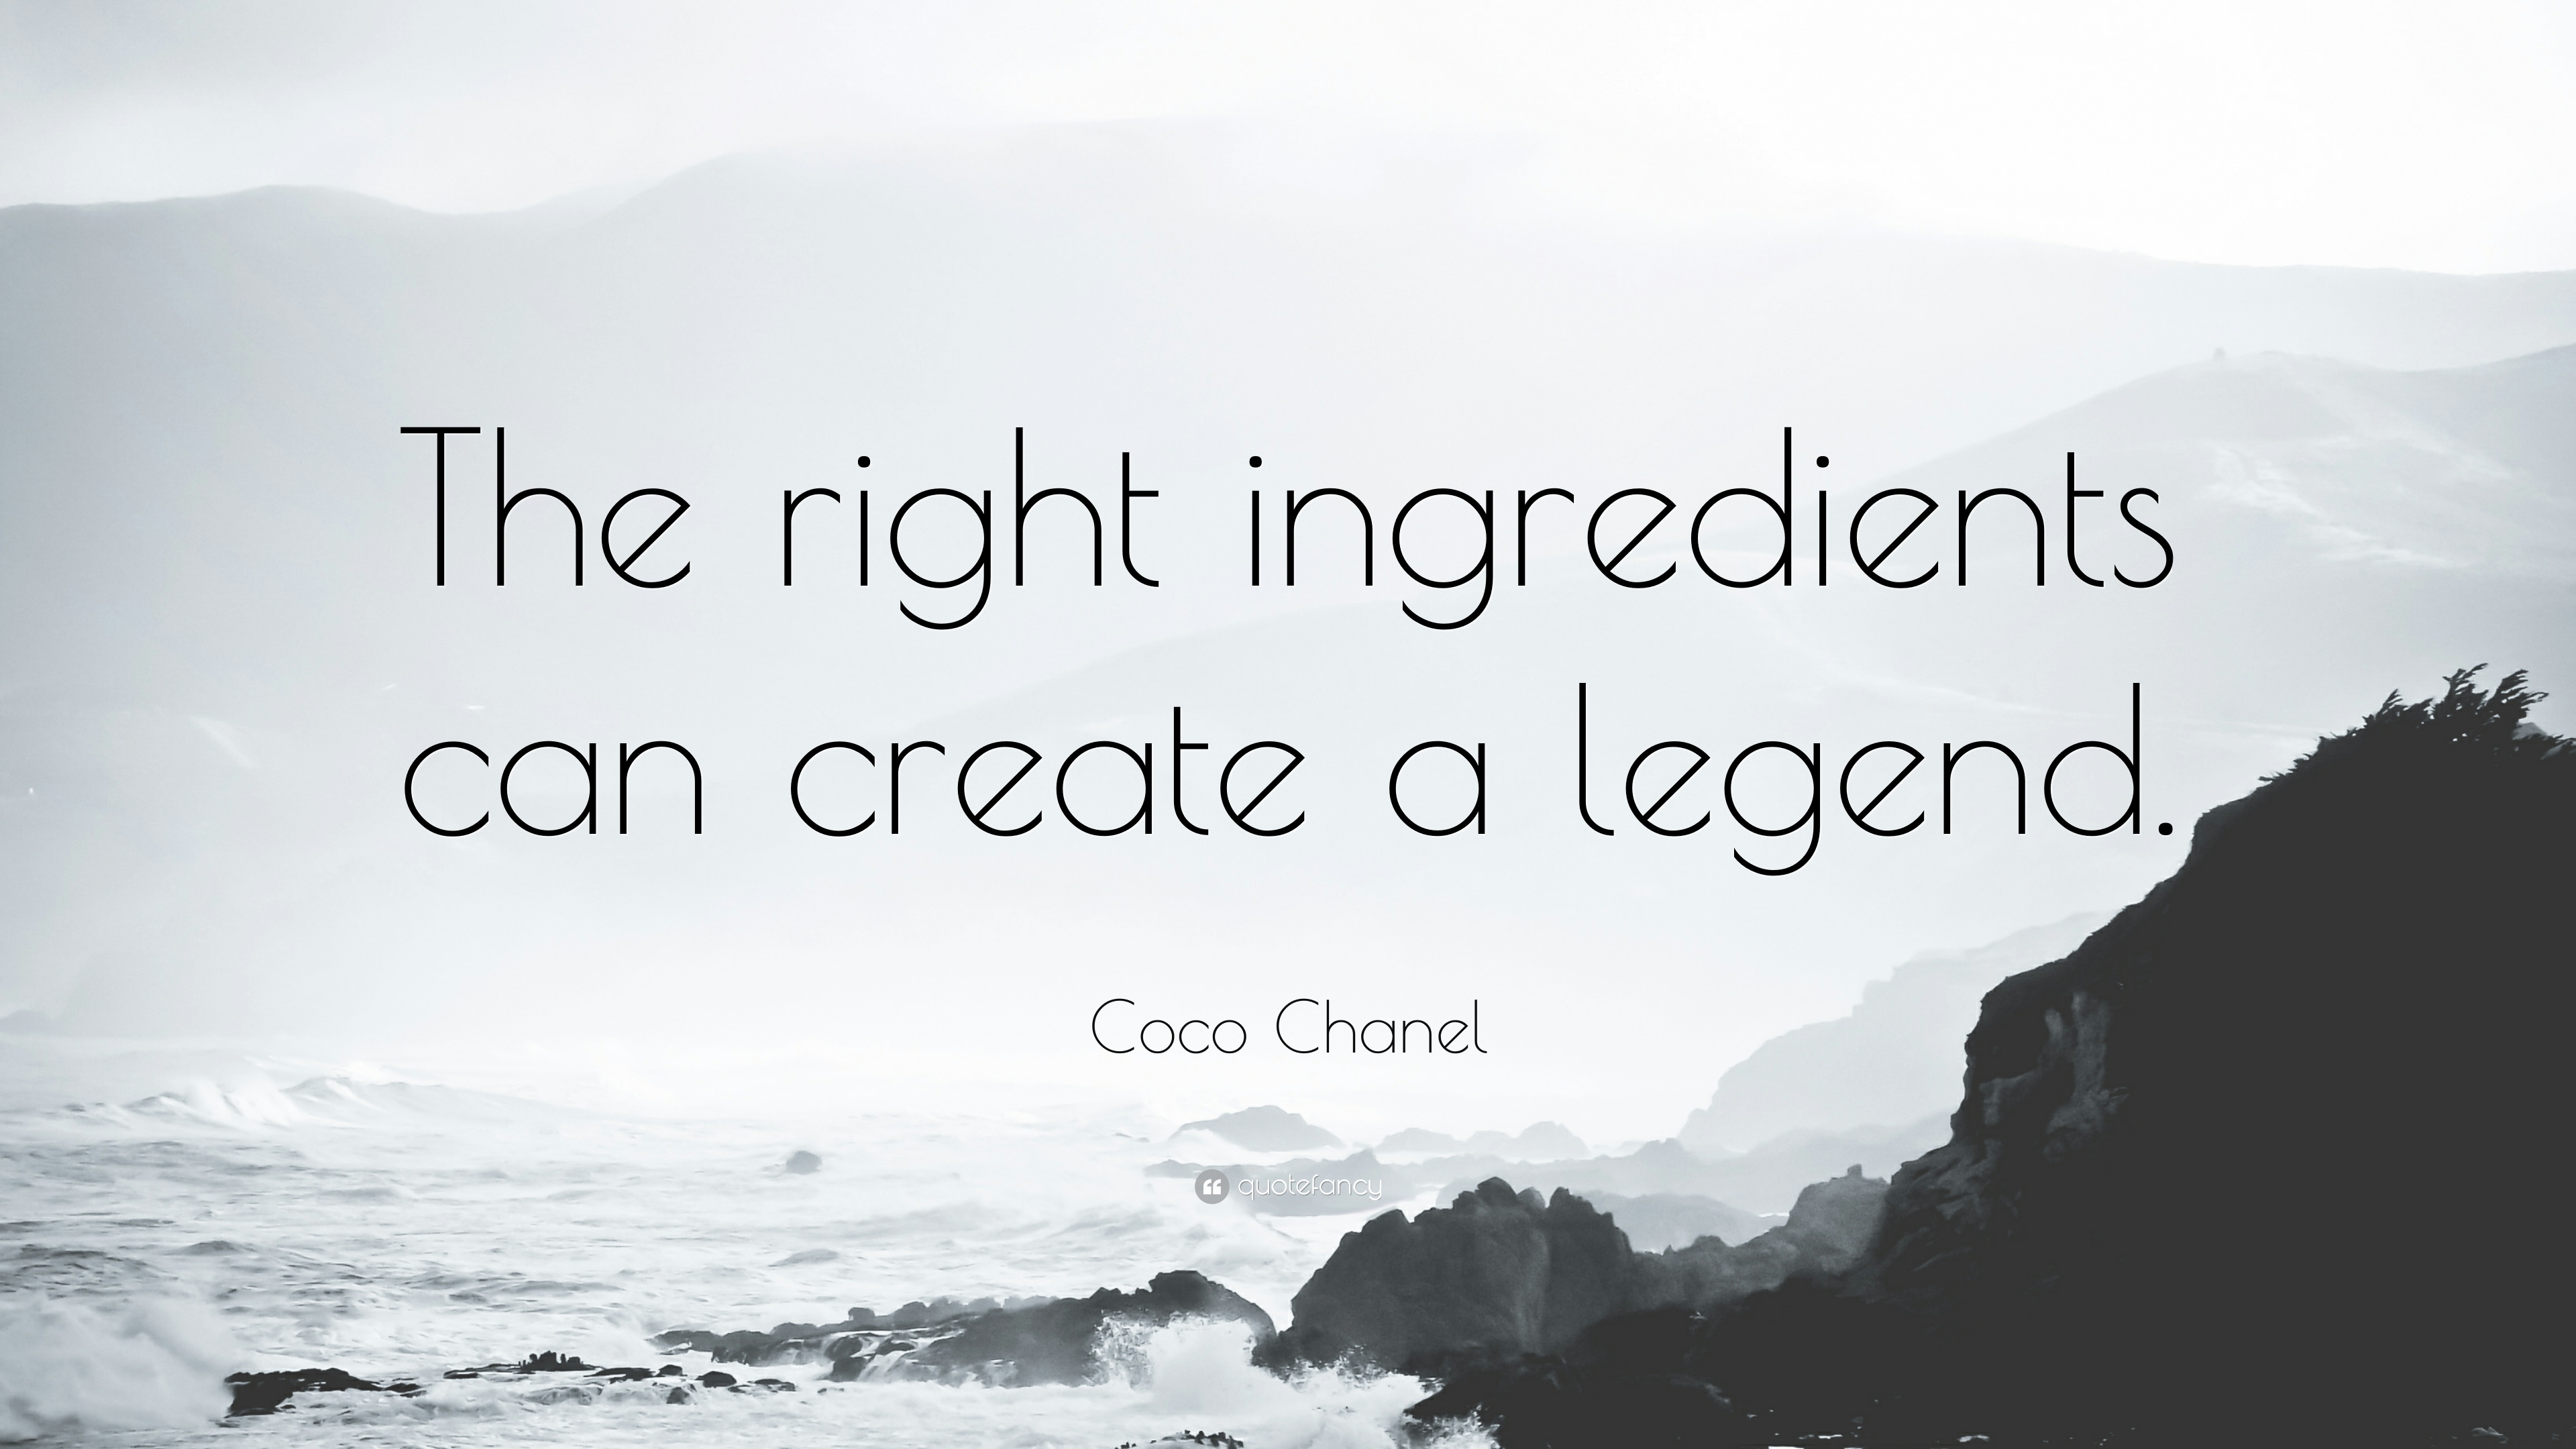 Coco Chanel Quote: “The right ingredients can create a